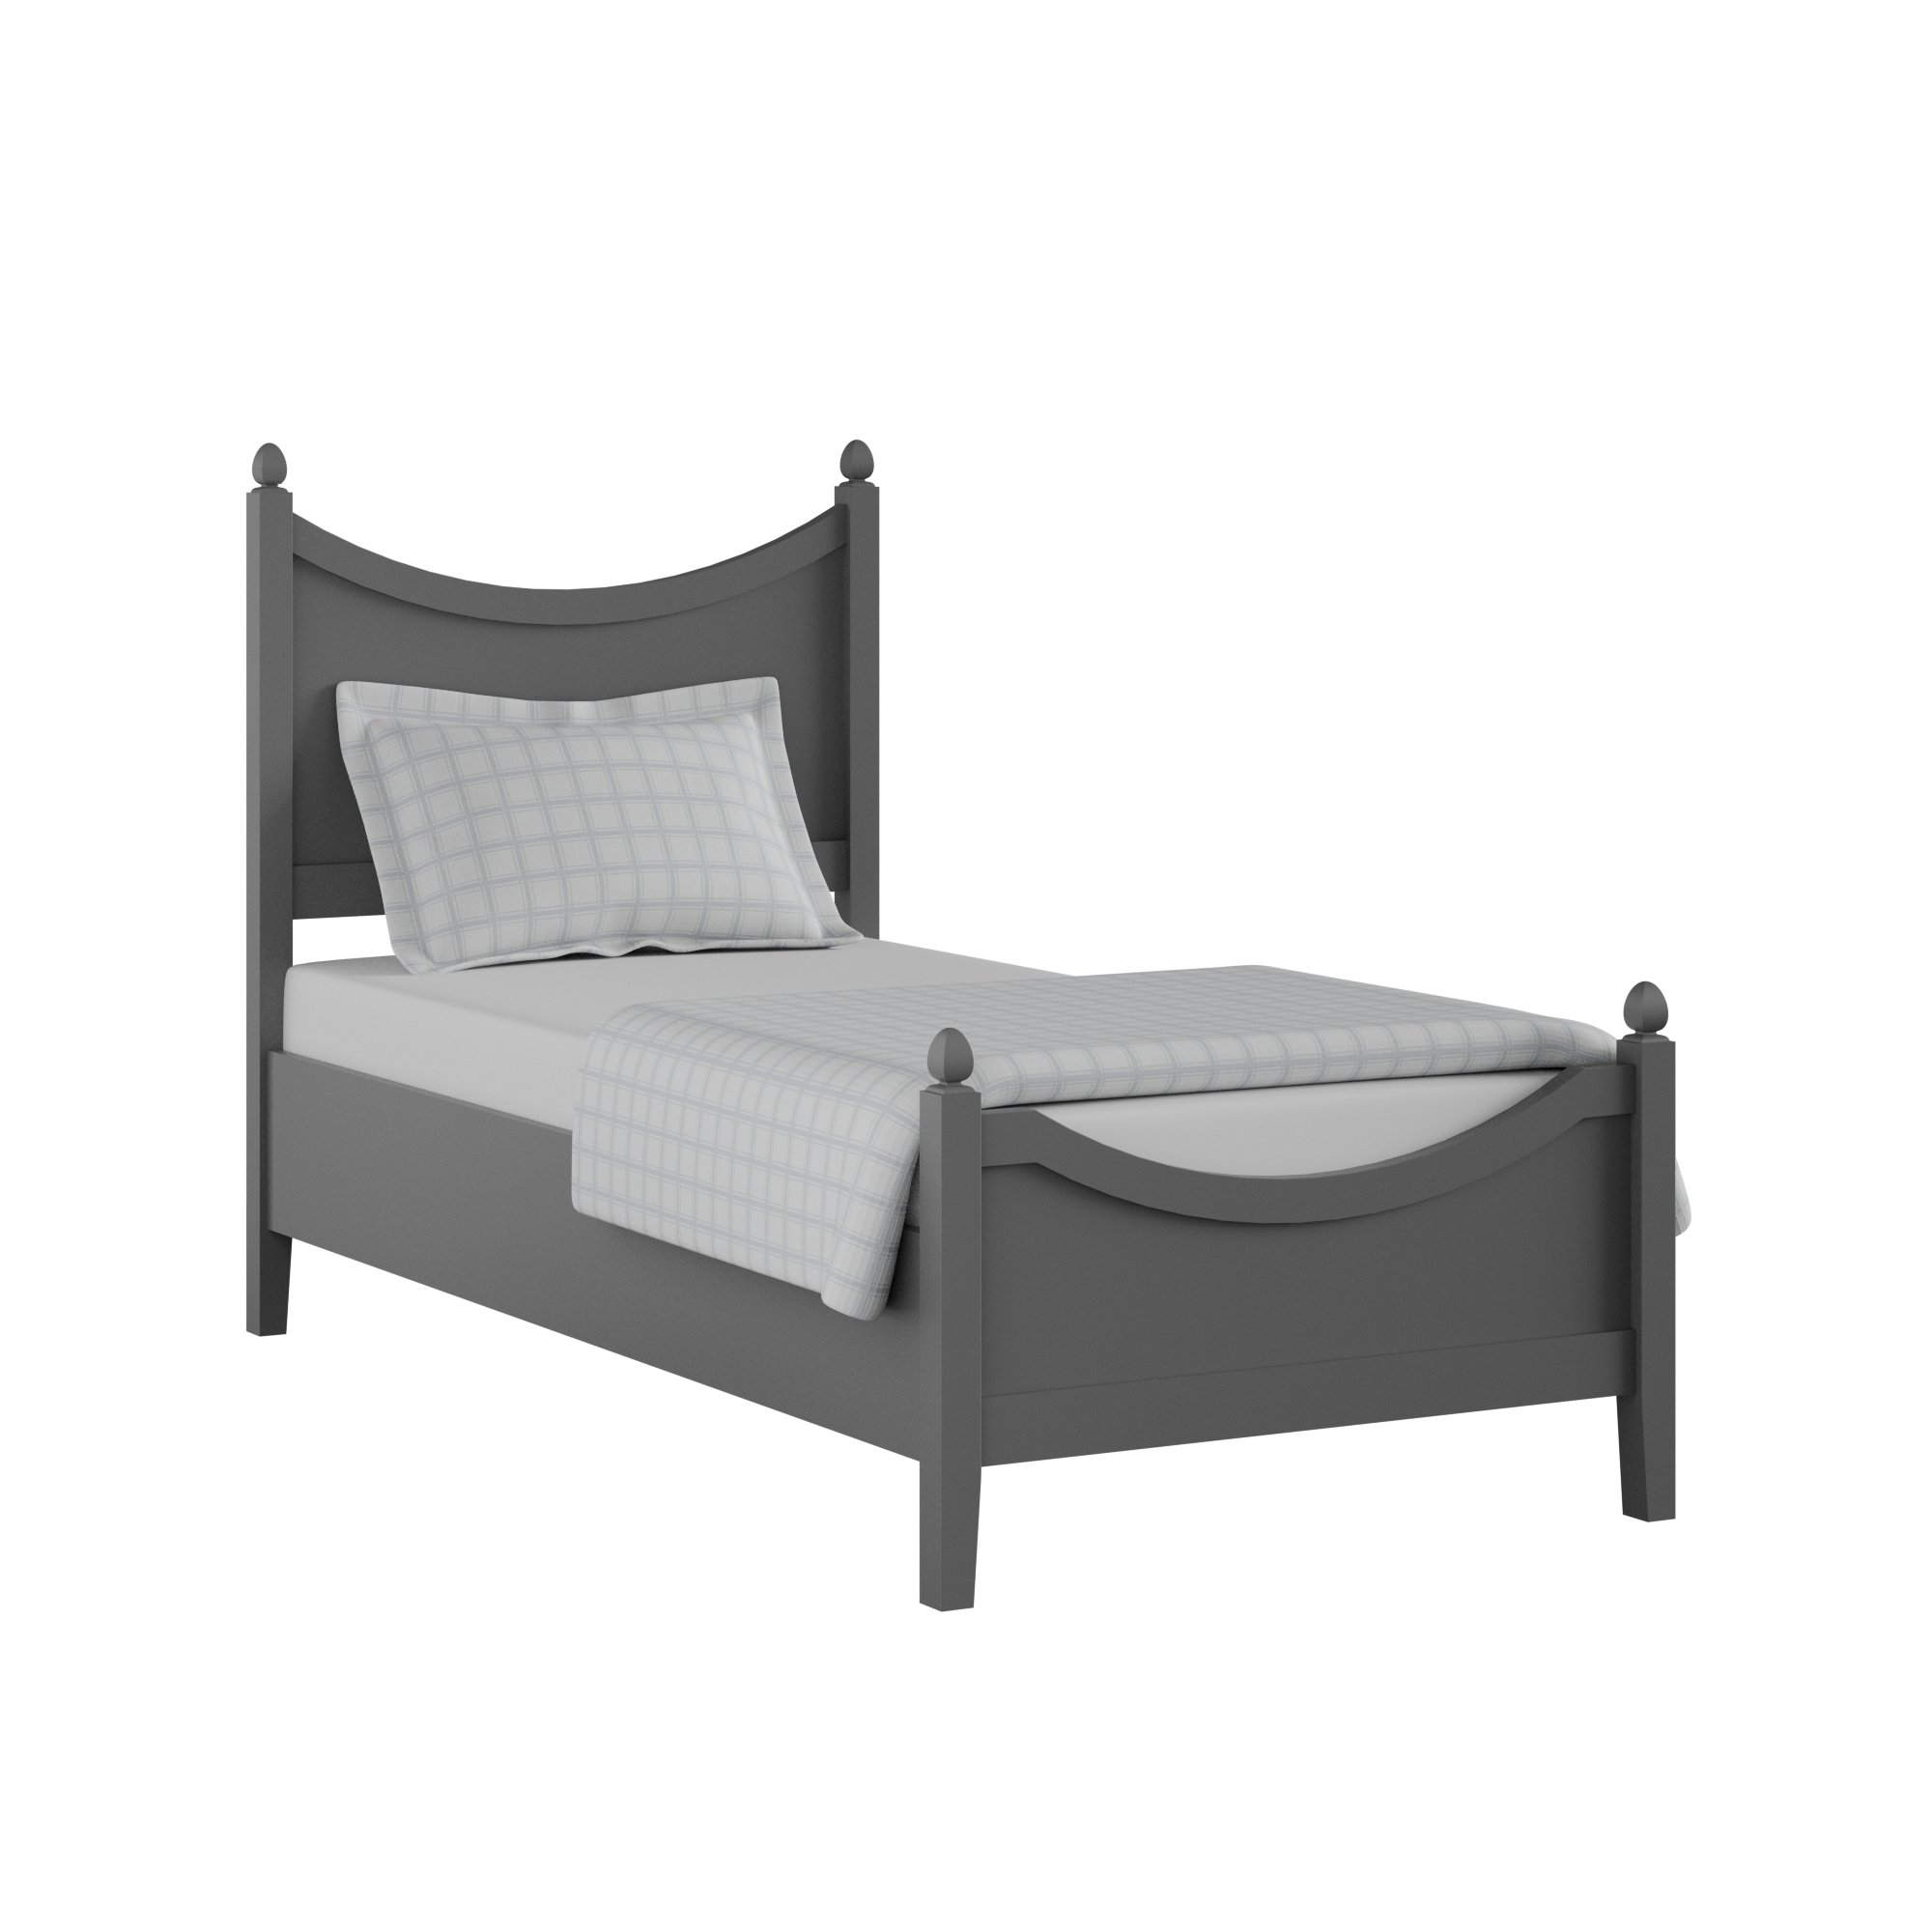 Blake Low Footend Painted single painted wood bed in grey with Juno mattress